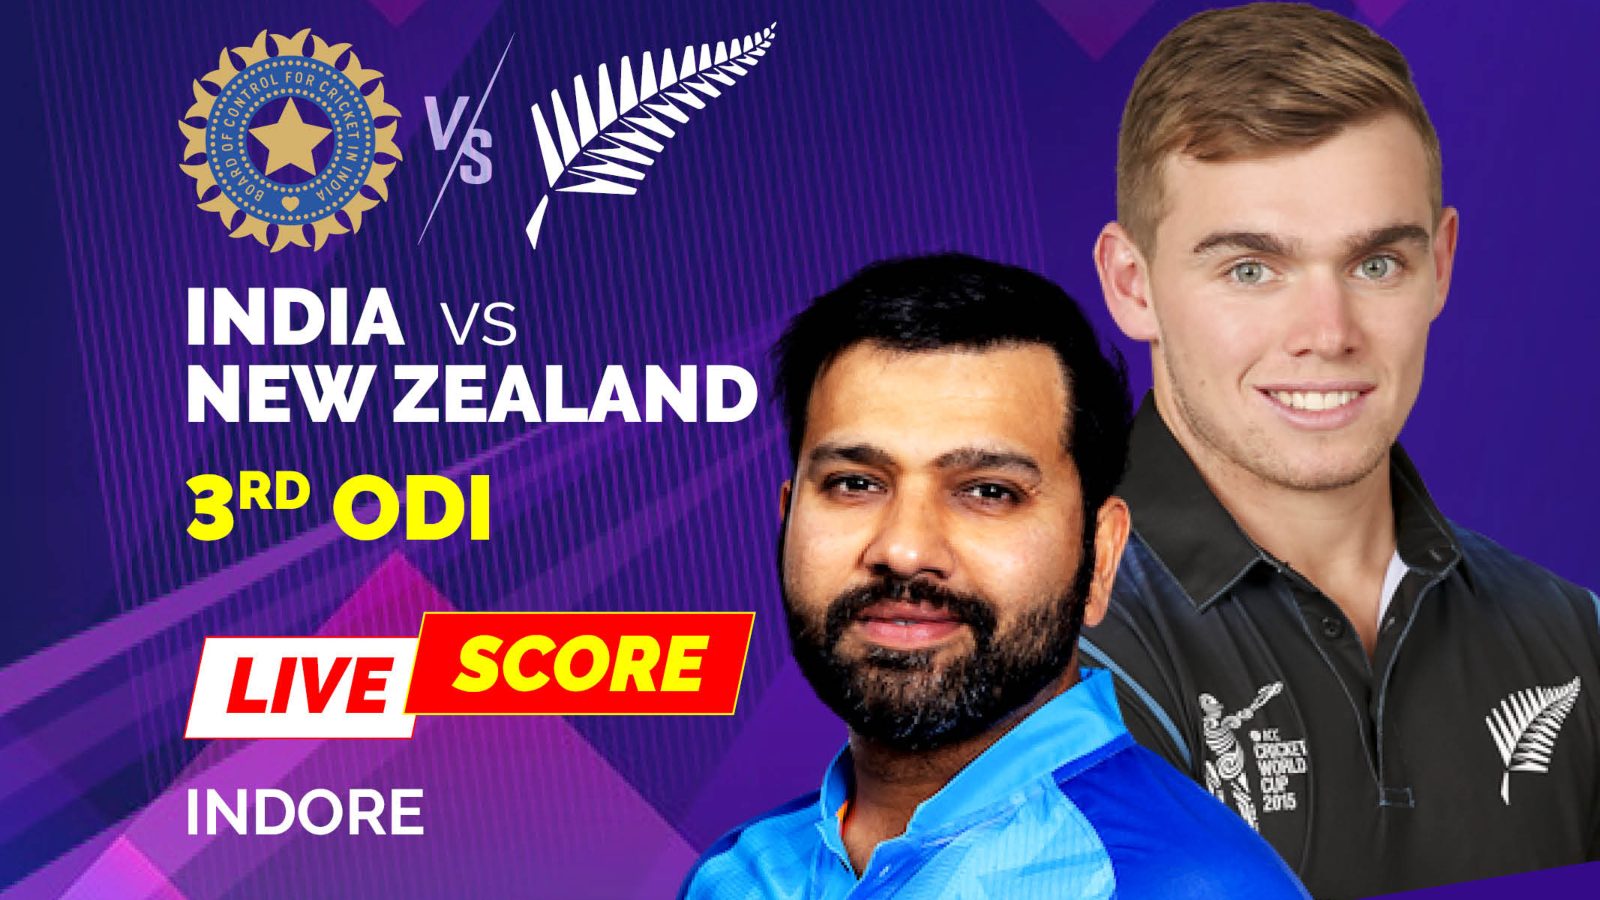 IND vs NZ, 3rd ODI Highlights India Beat New Zealand by 90 Runs to Affect 3-0 Whitewash